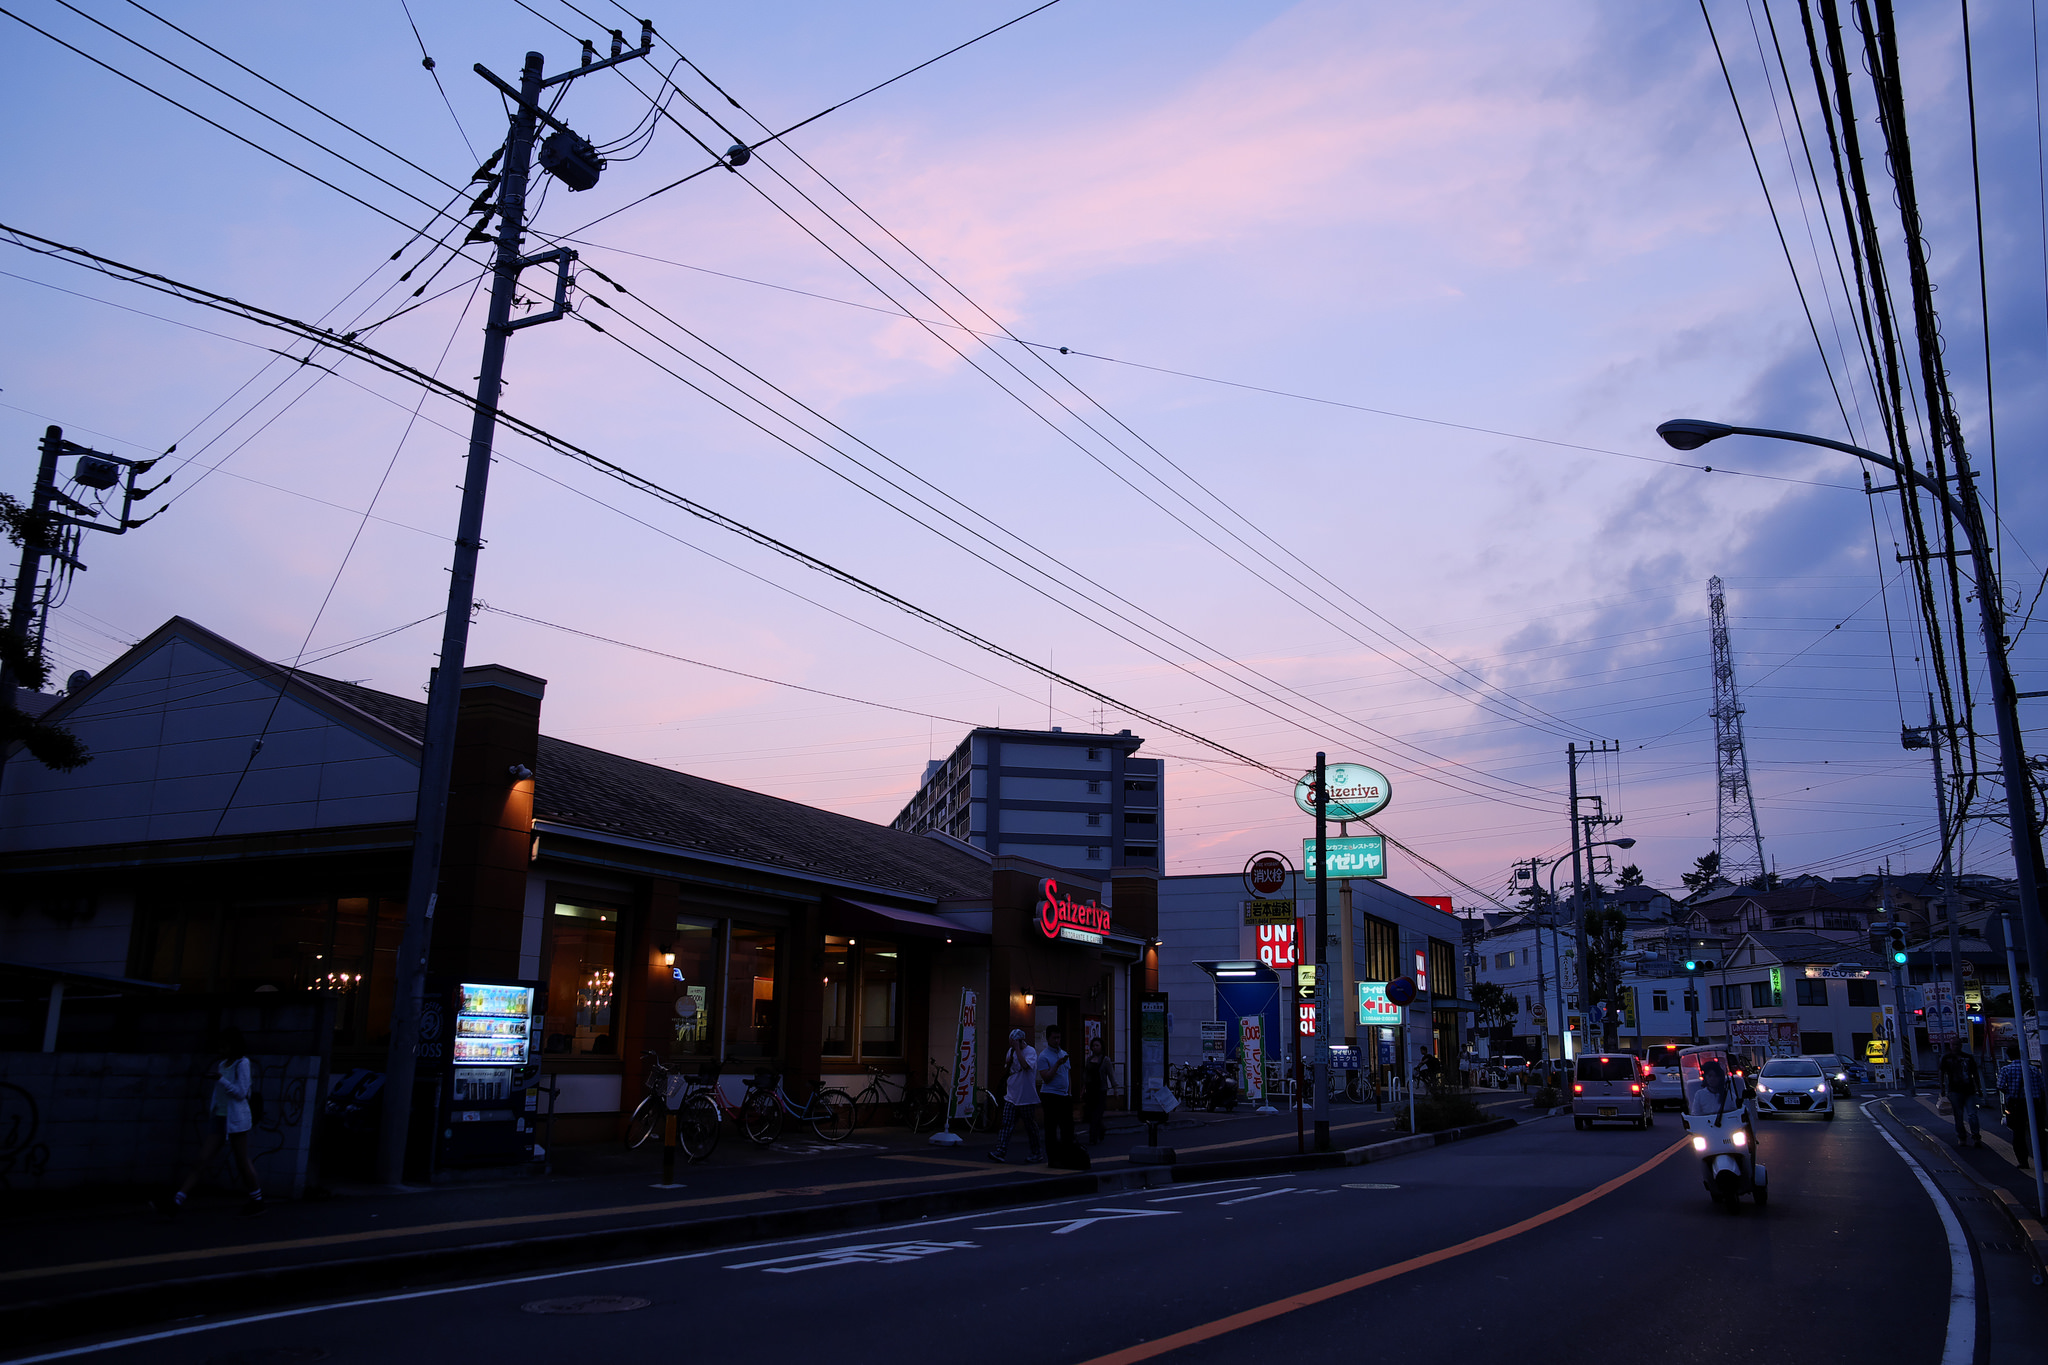 General 2048x1365 city urban photography dusk wires Japan low light